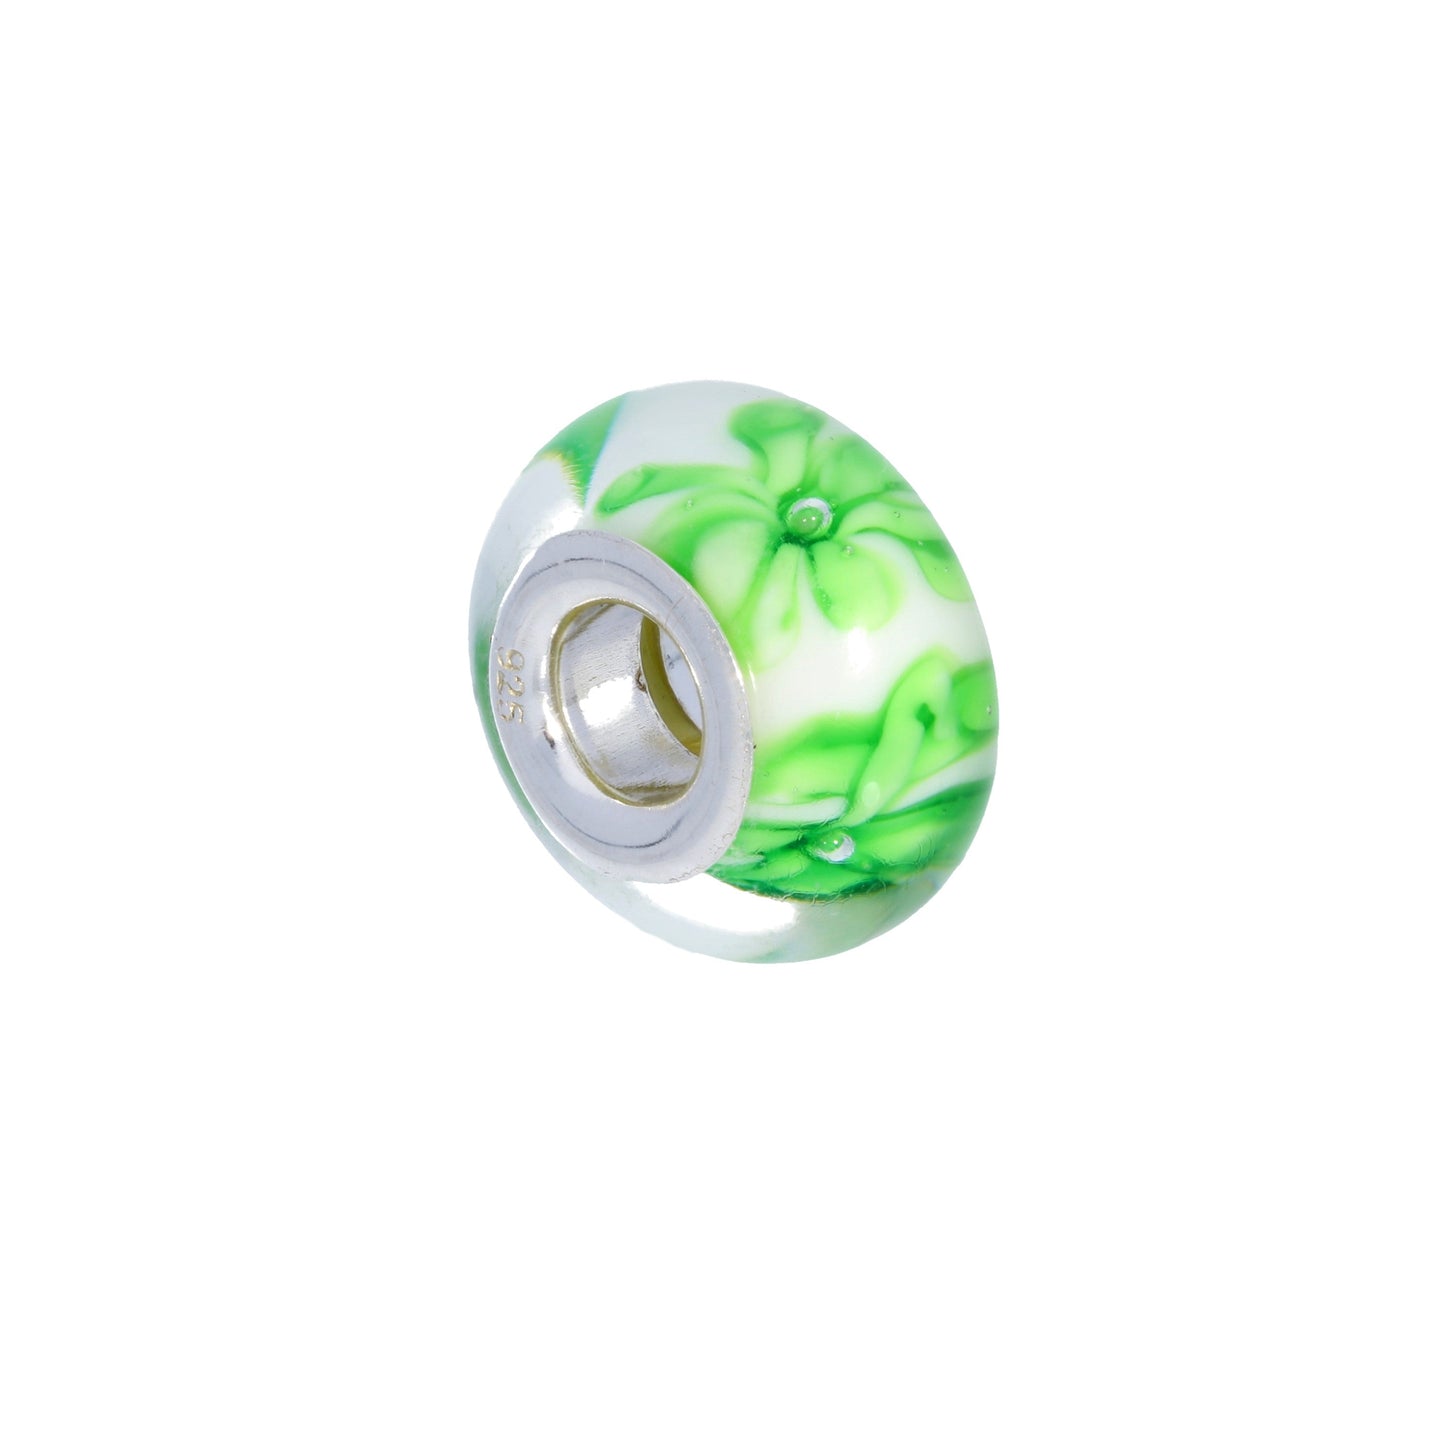 Sterling Silver & Green Glass Bead Charm with Flowers